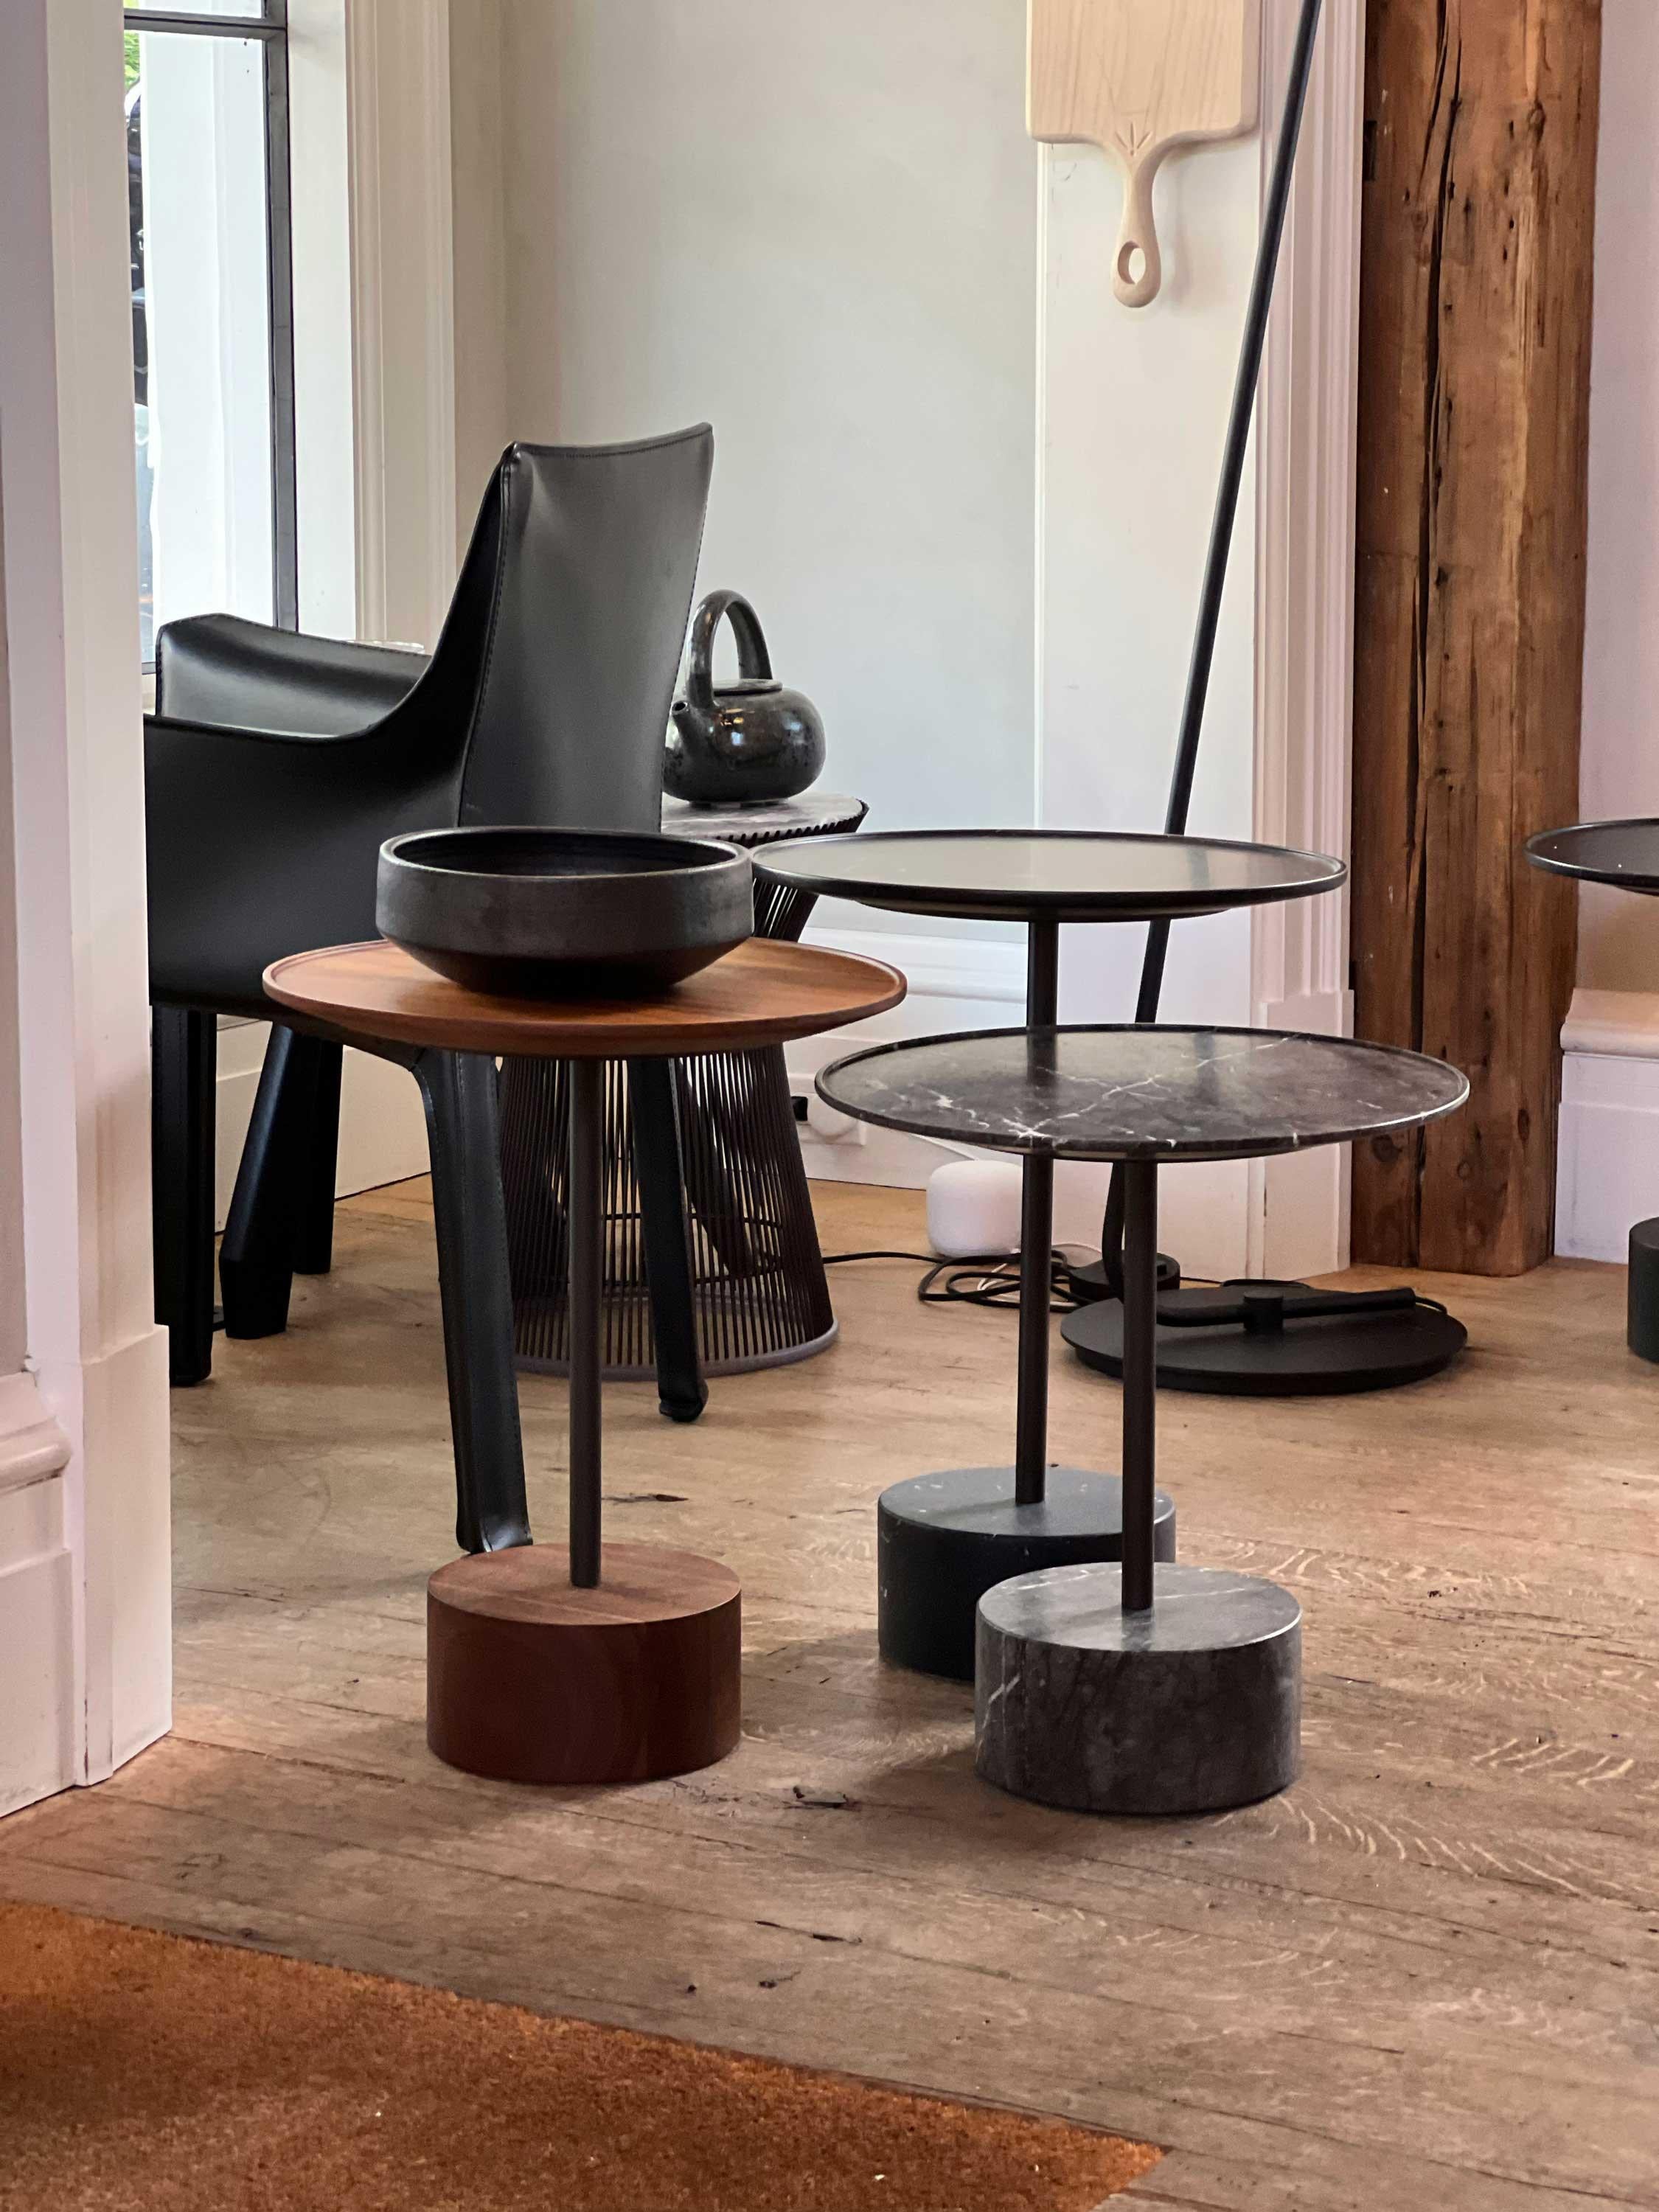 Cassina was established in 1927 in the Northern region of Brianza, Italy, an area noted for its skilled artisans and woodworkers. Rooted in high quality Italian craftsmanship Cassina began acquiring licenses to reproduce some of the worlds most well